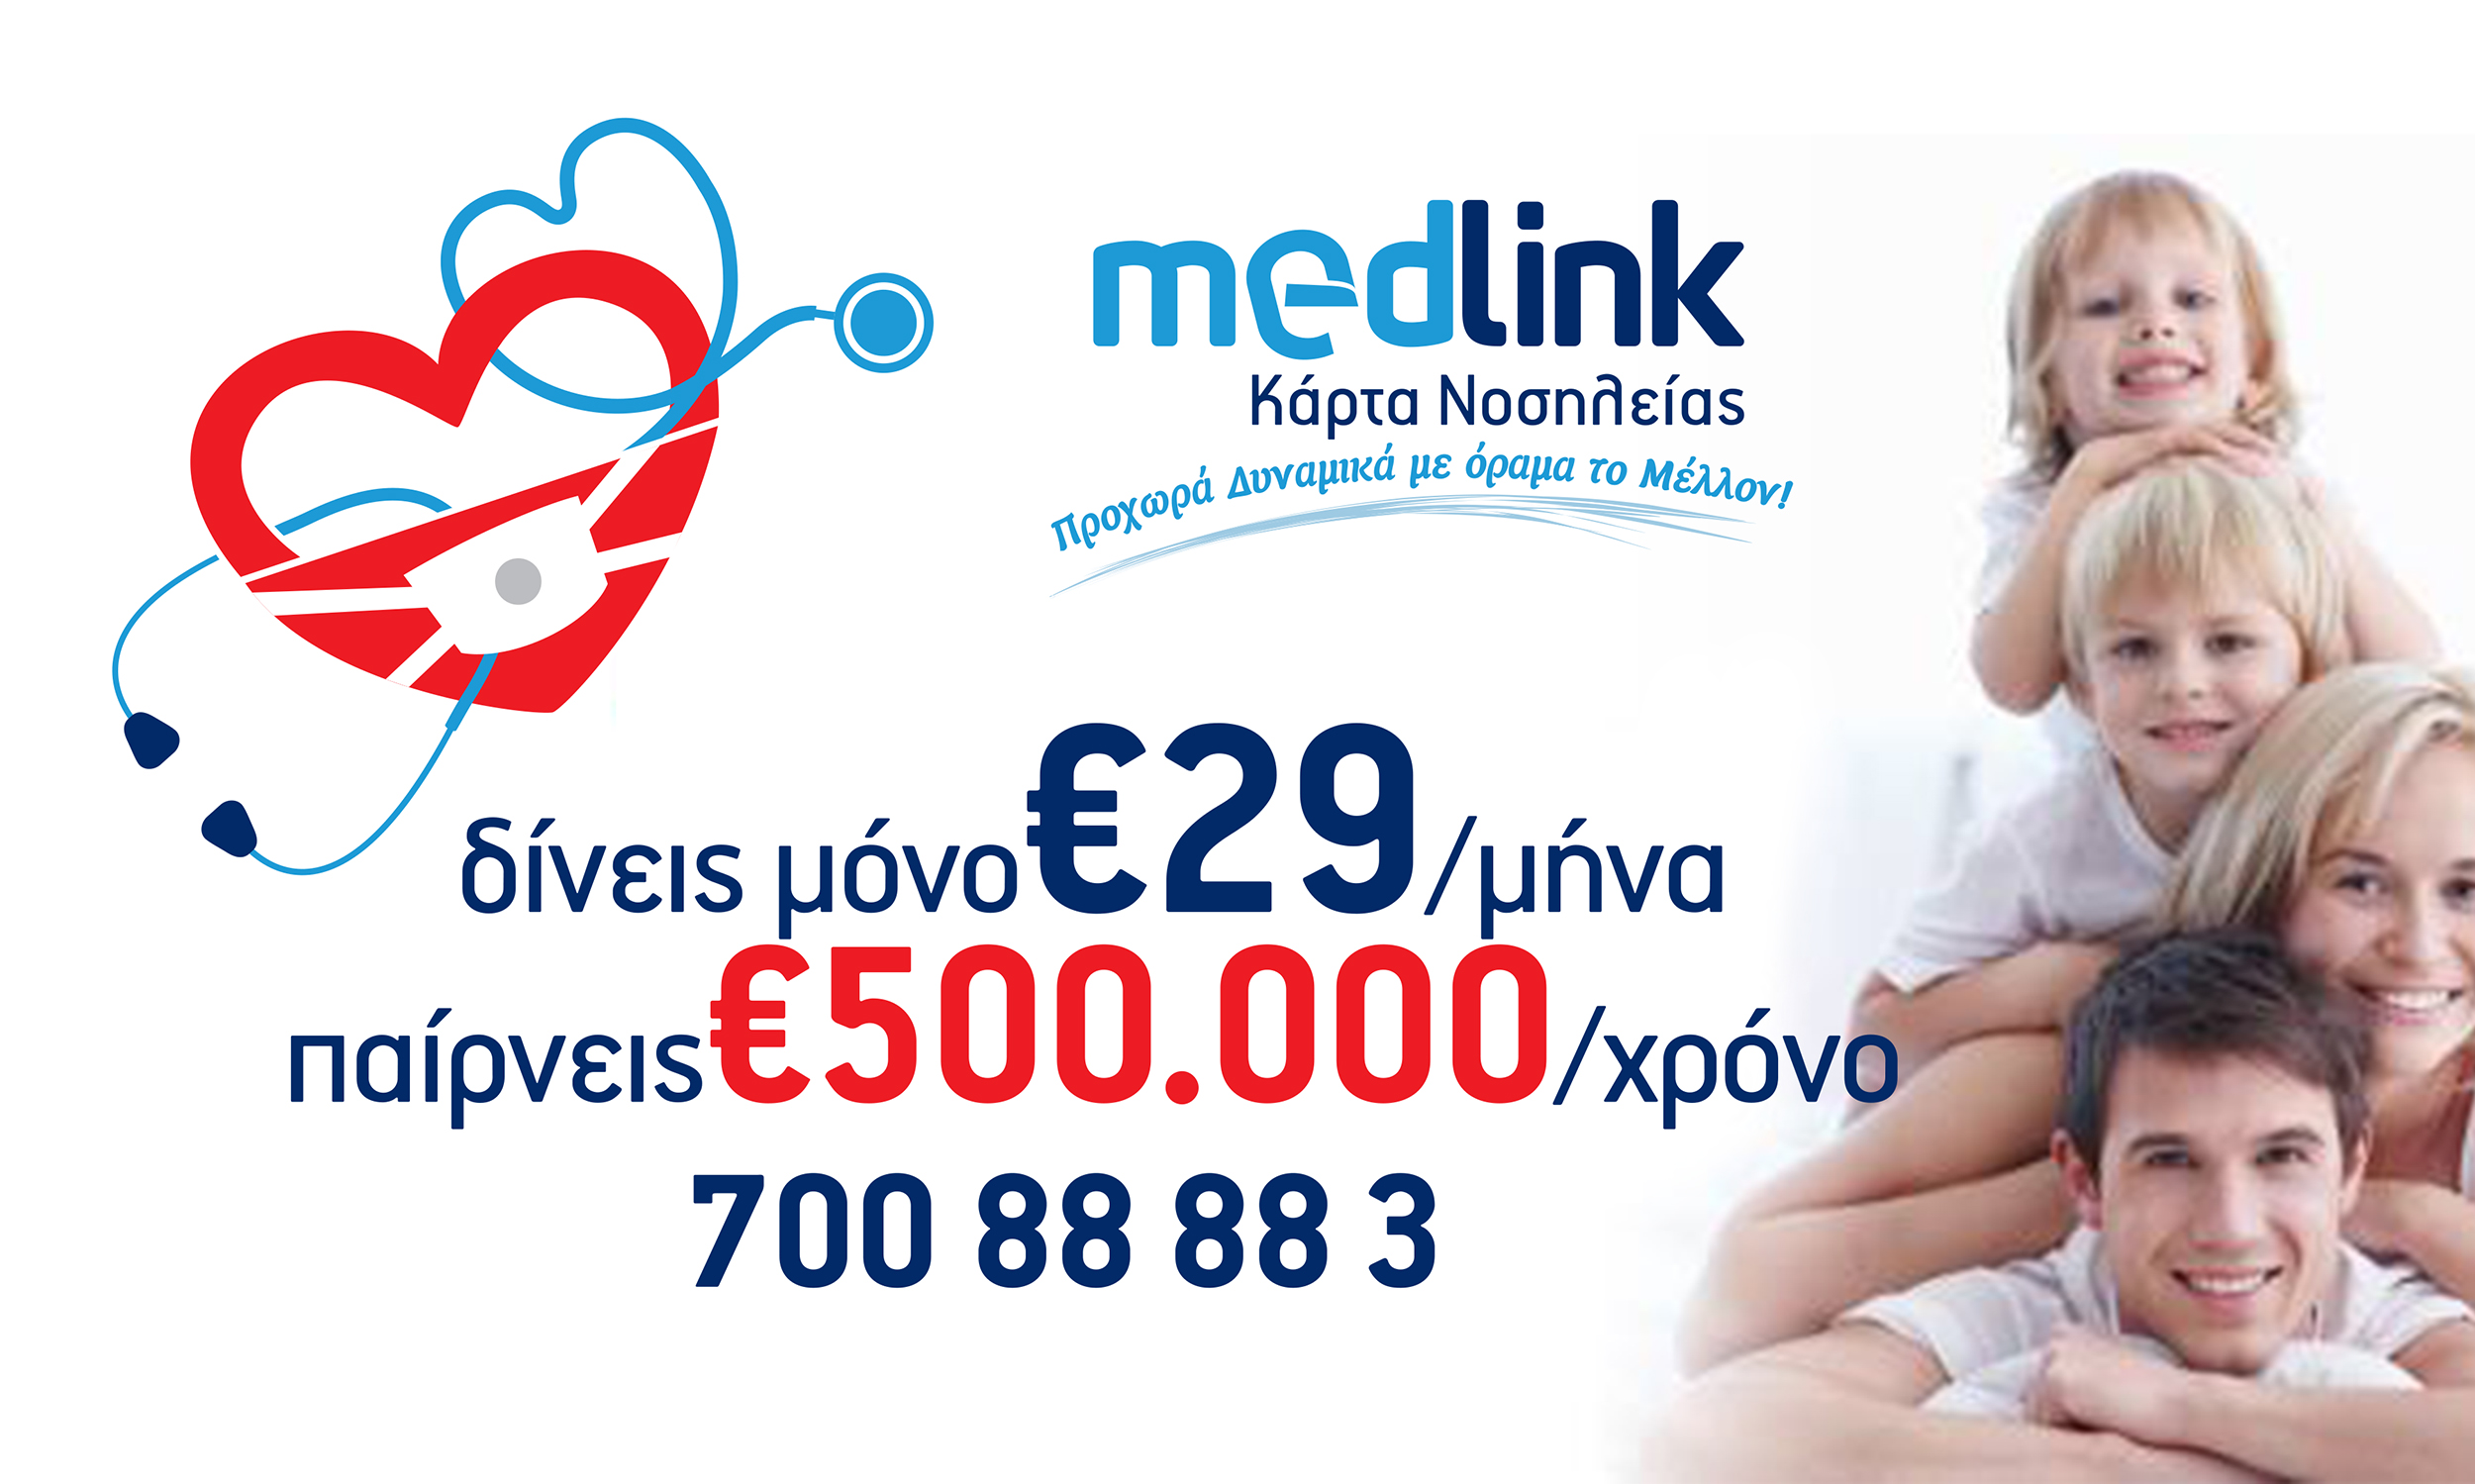 cover_photo_medlink_page_2020B insurance link cyprus nicosia